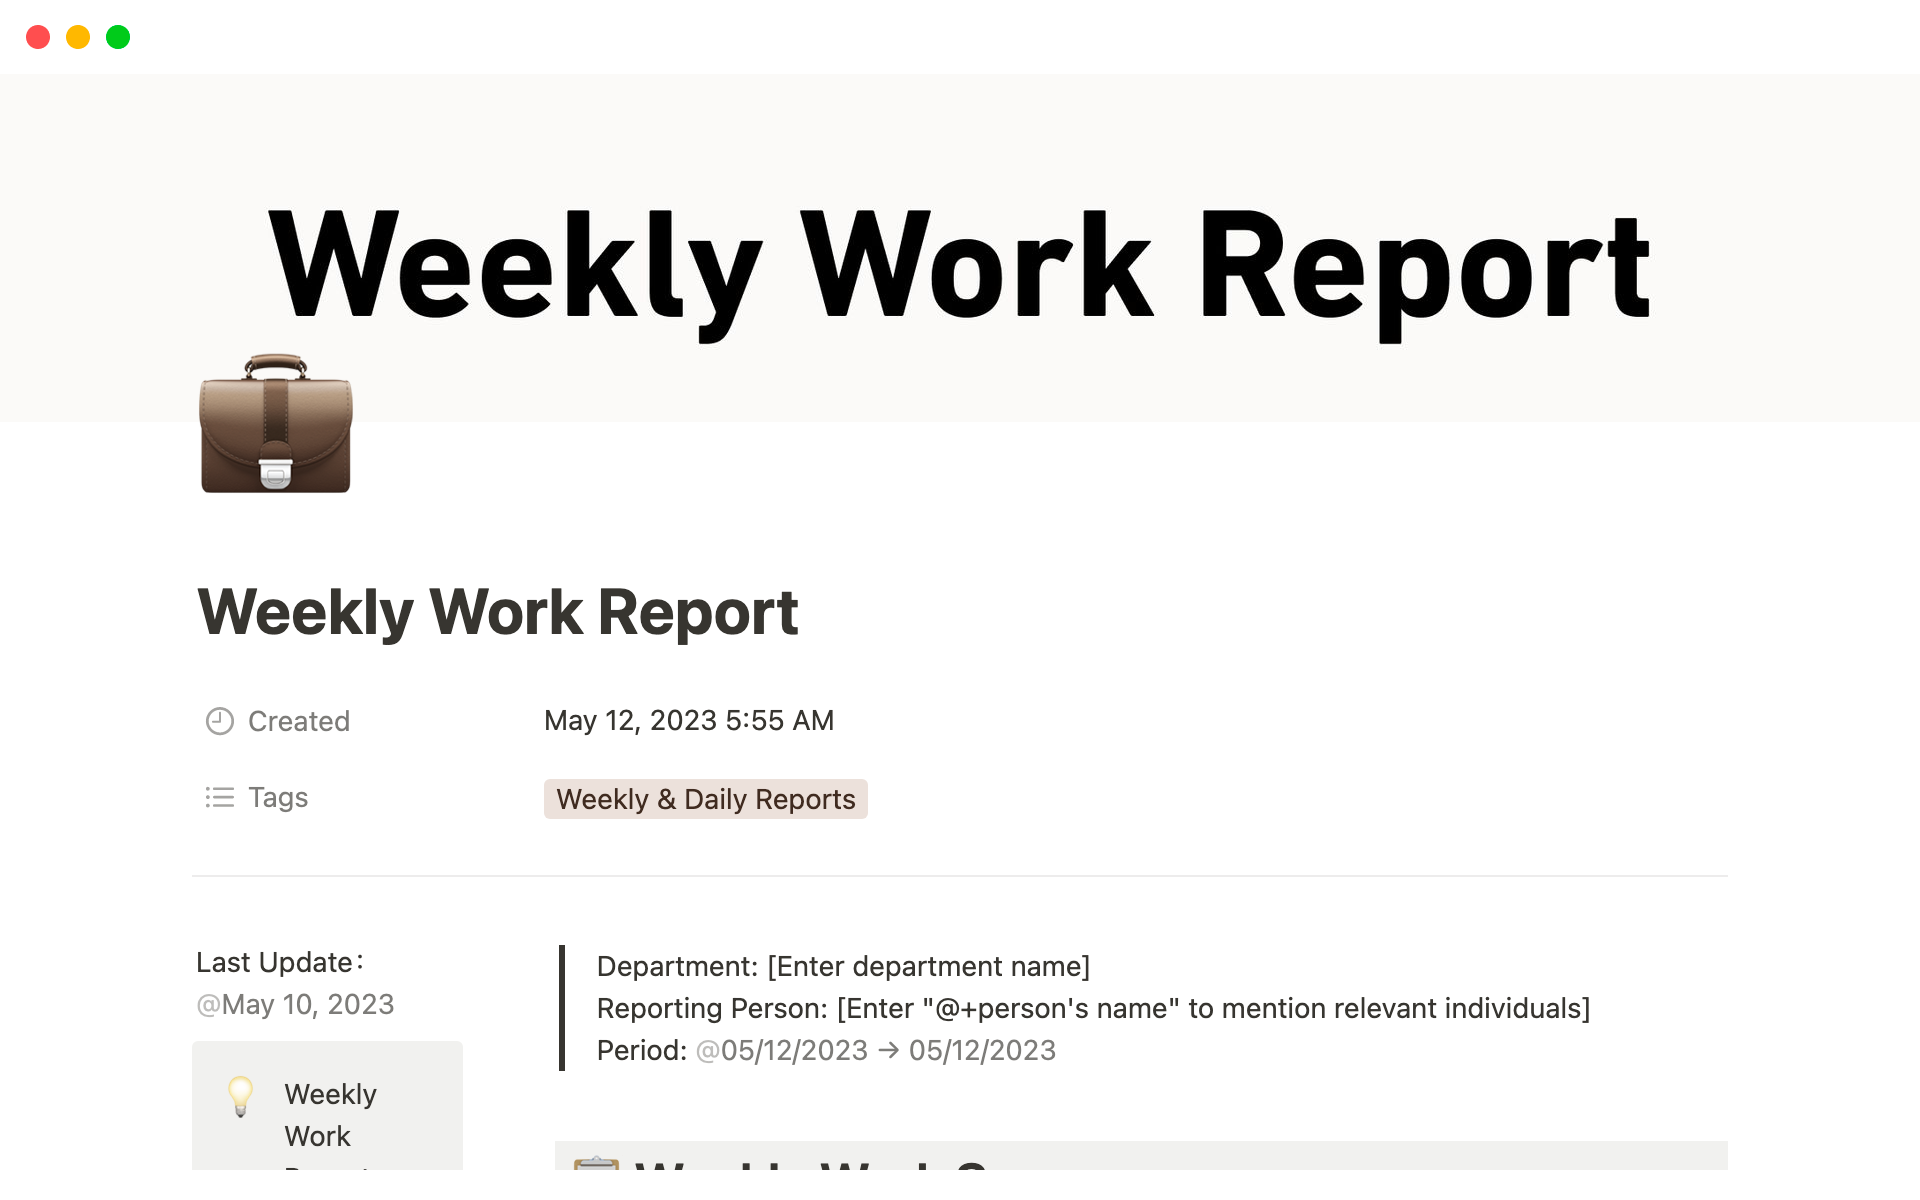 Weekly Work Reports are a common practice in many organizations where individuals or teams provide a summary of their work activities and accomplishments during a given week.